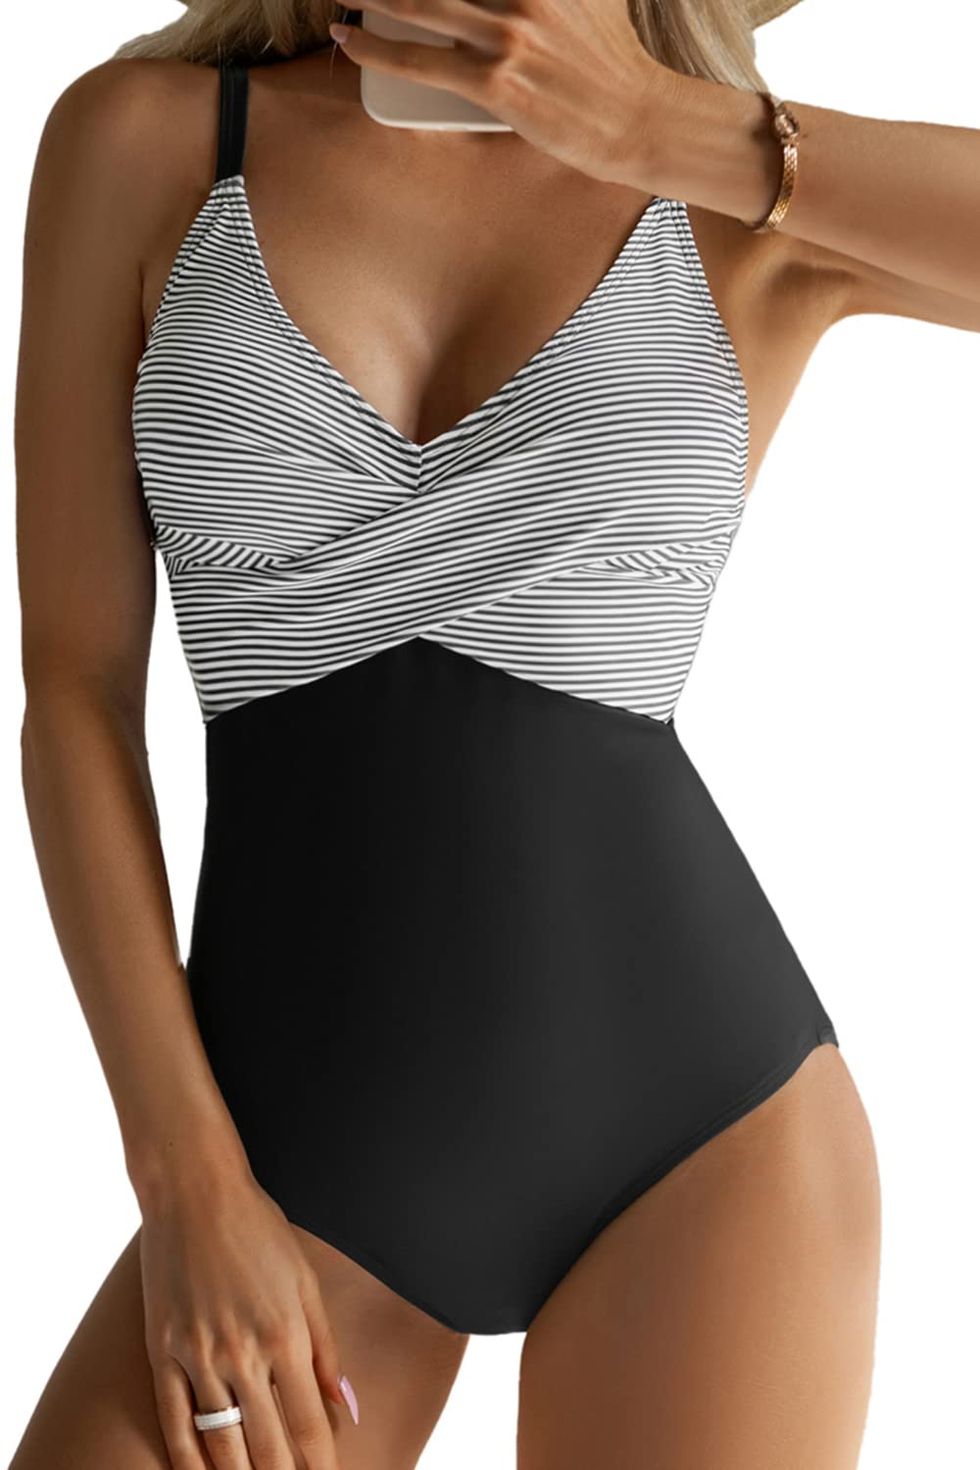 Women's One-Piece Swimsuits: Plunge, Halter, and Monokini – Anne Cole